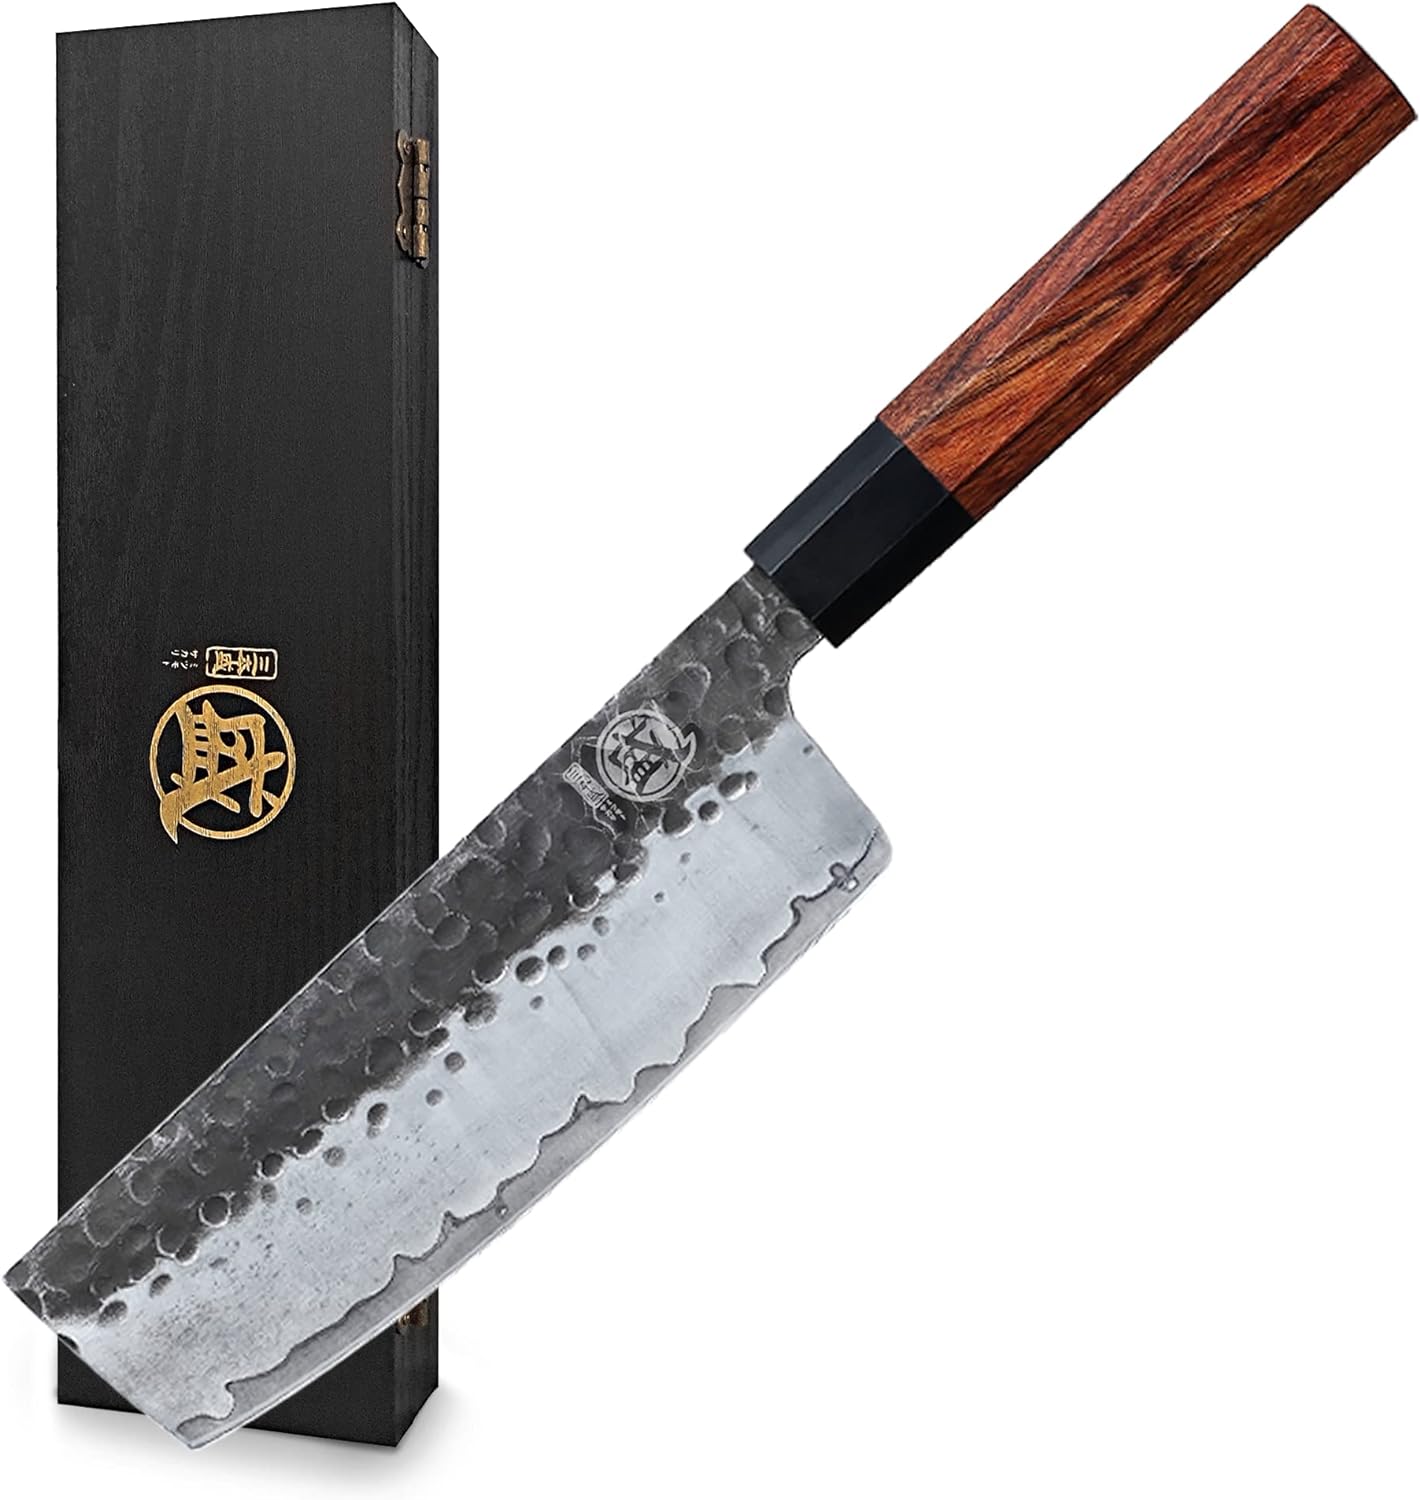 KD Japanese Gyuto Hand Forged Kitchen Knives with Gift Box